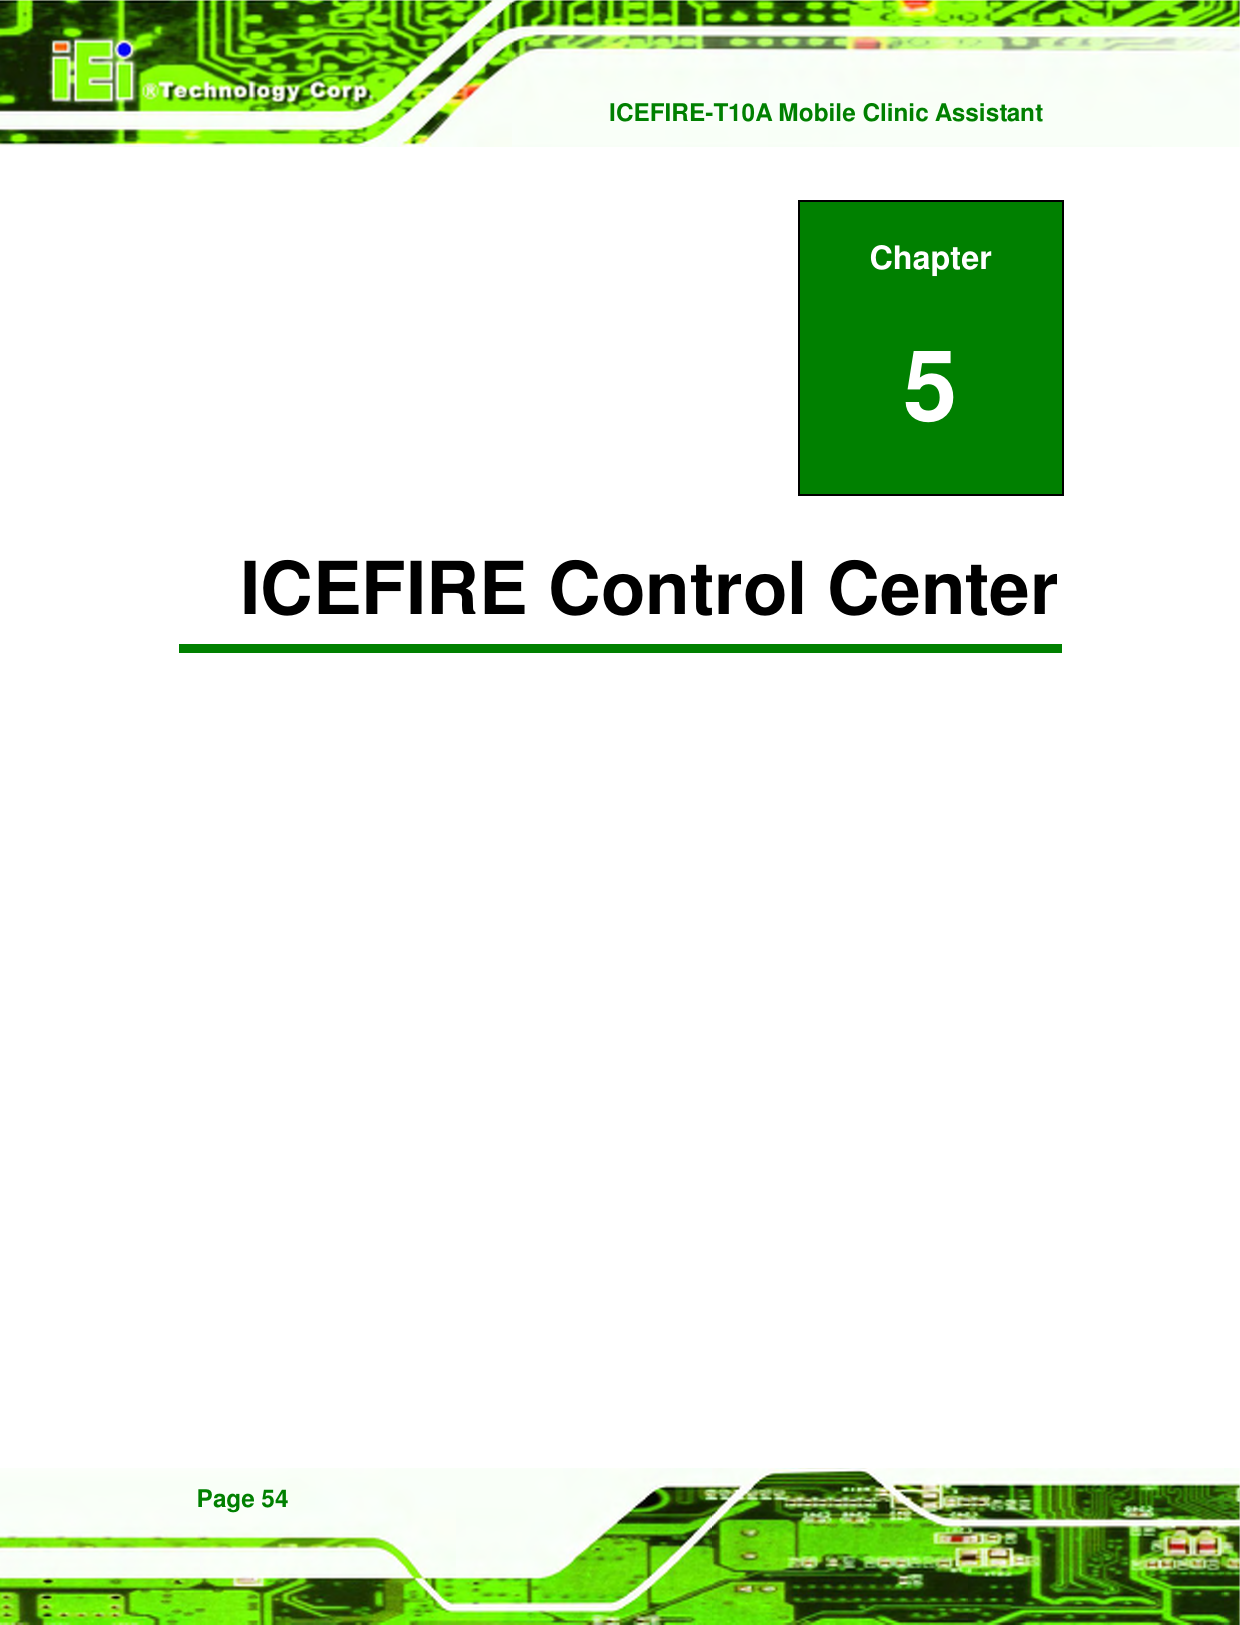   ICEFIRE-T10A Mobile Clinic Assistant Page 54 Chapter 5 5 ICEFIRE Control Center 